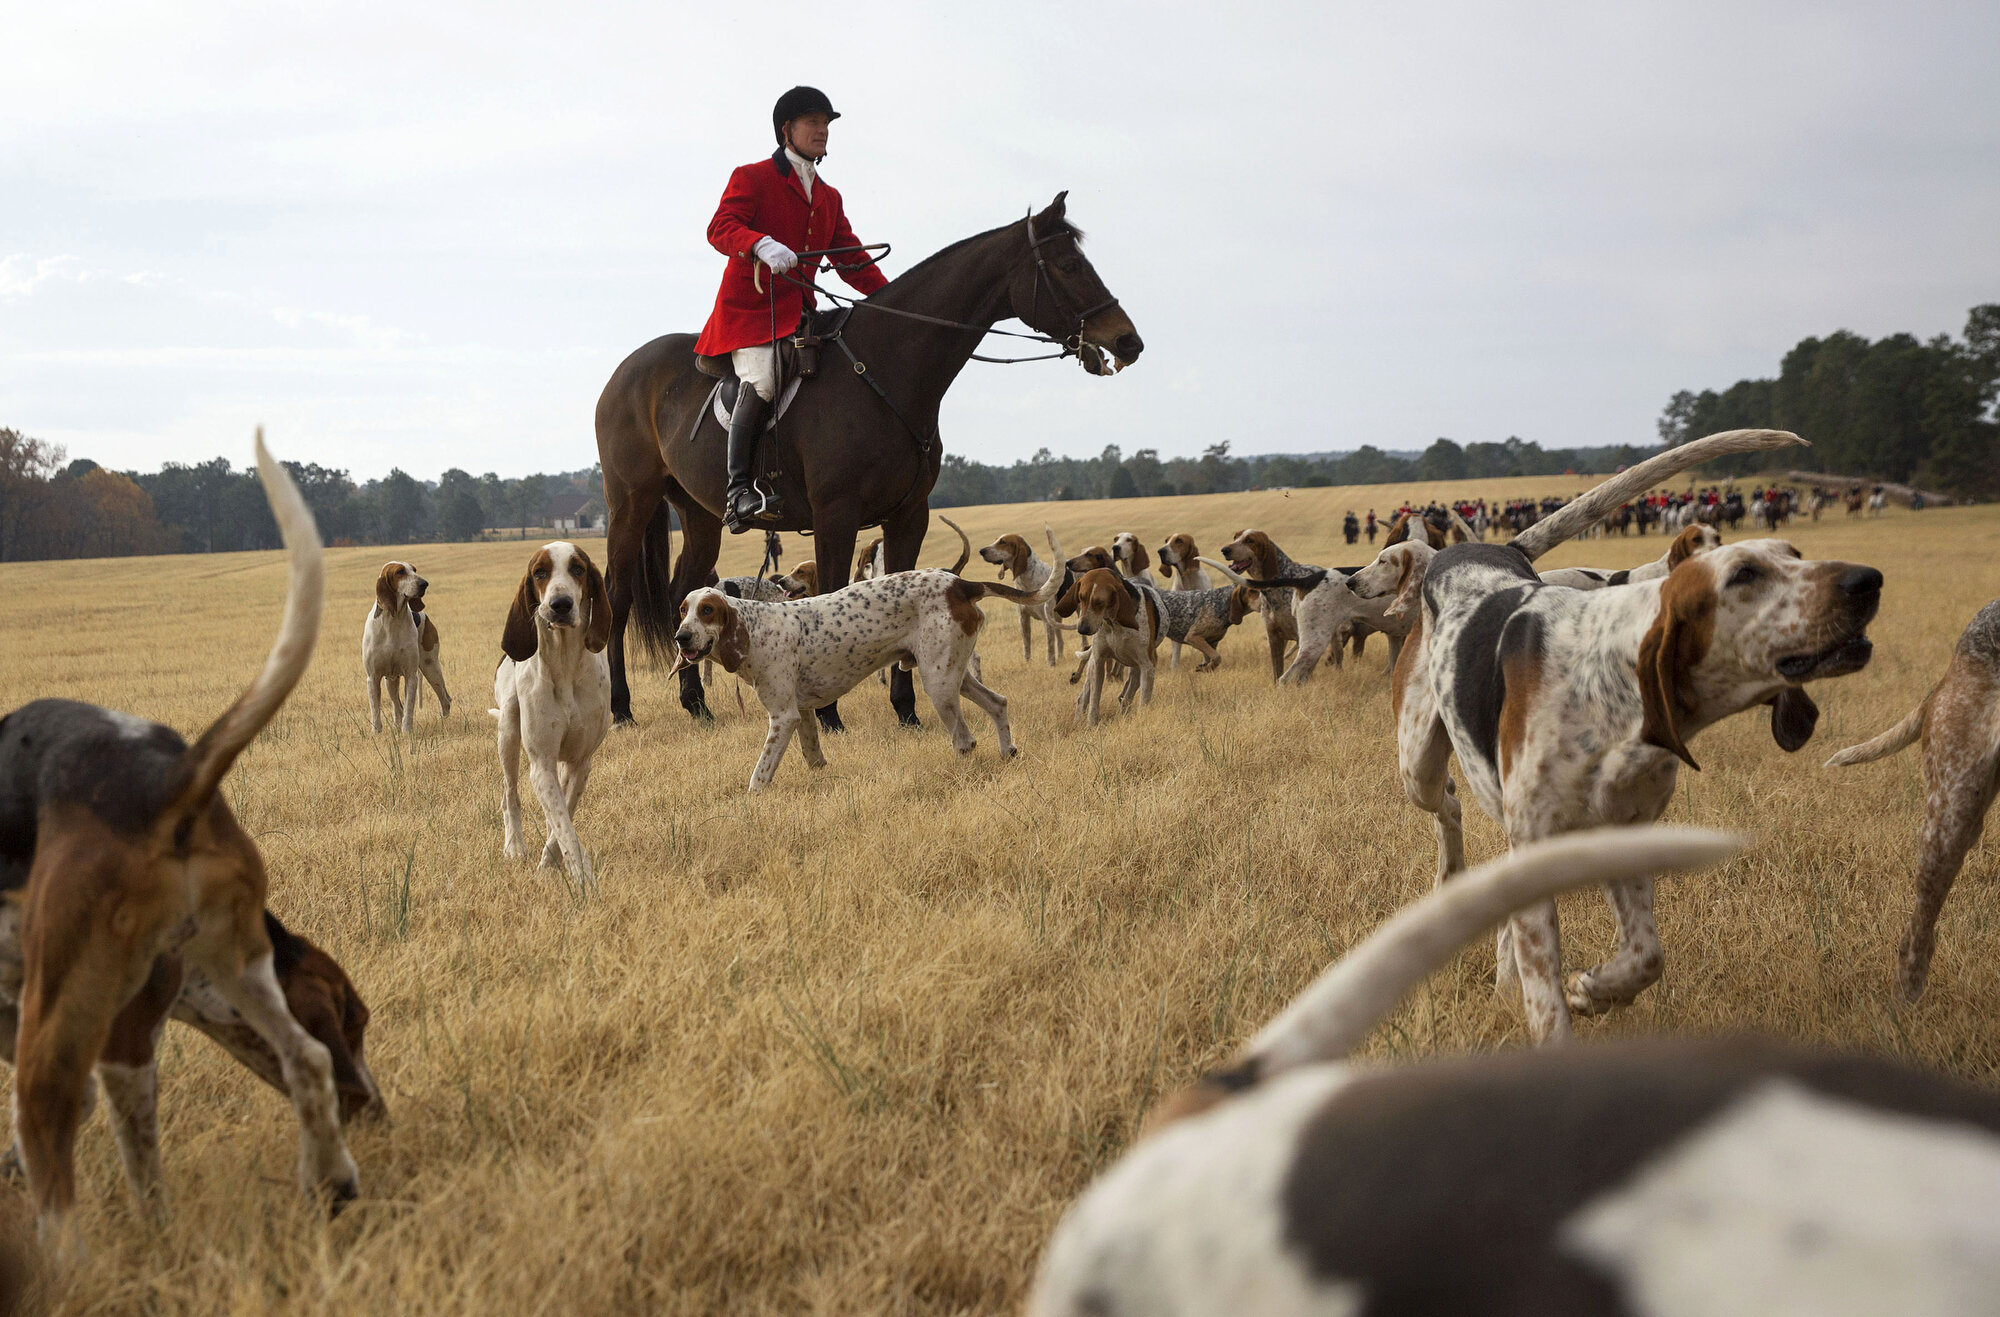  Lincoln Sadler, a huntsman with the Moore County Hounds, leads a pack of Penn-Marydel hounds during the the Thanksgiving Day opening meet. The Moore County Hounds is one of the oldest North American hunt clubs. 